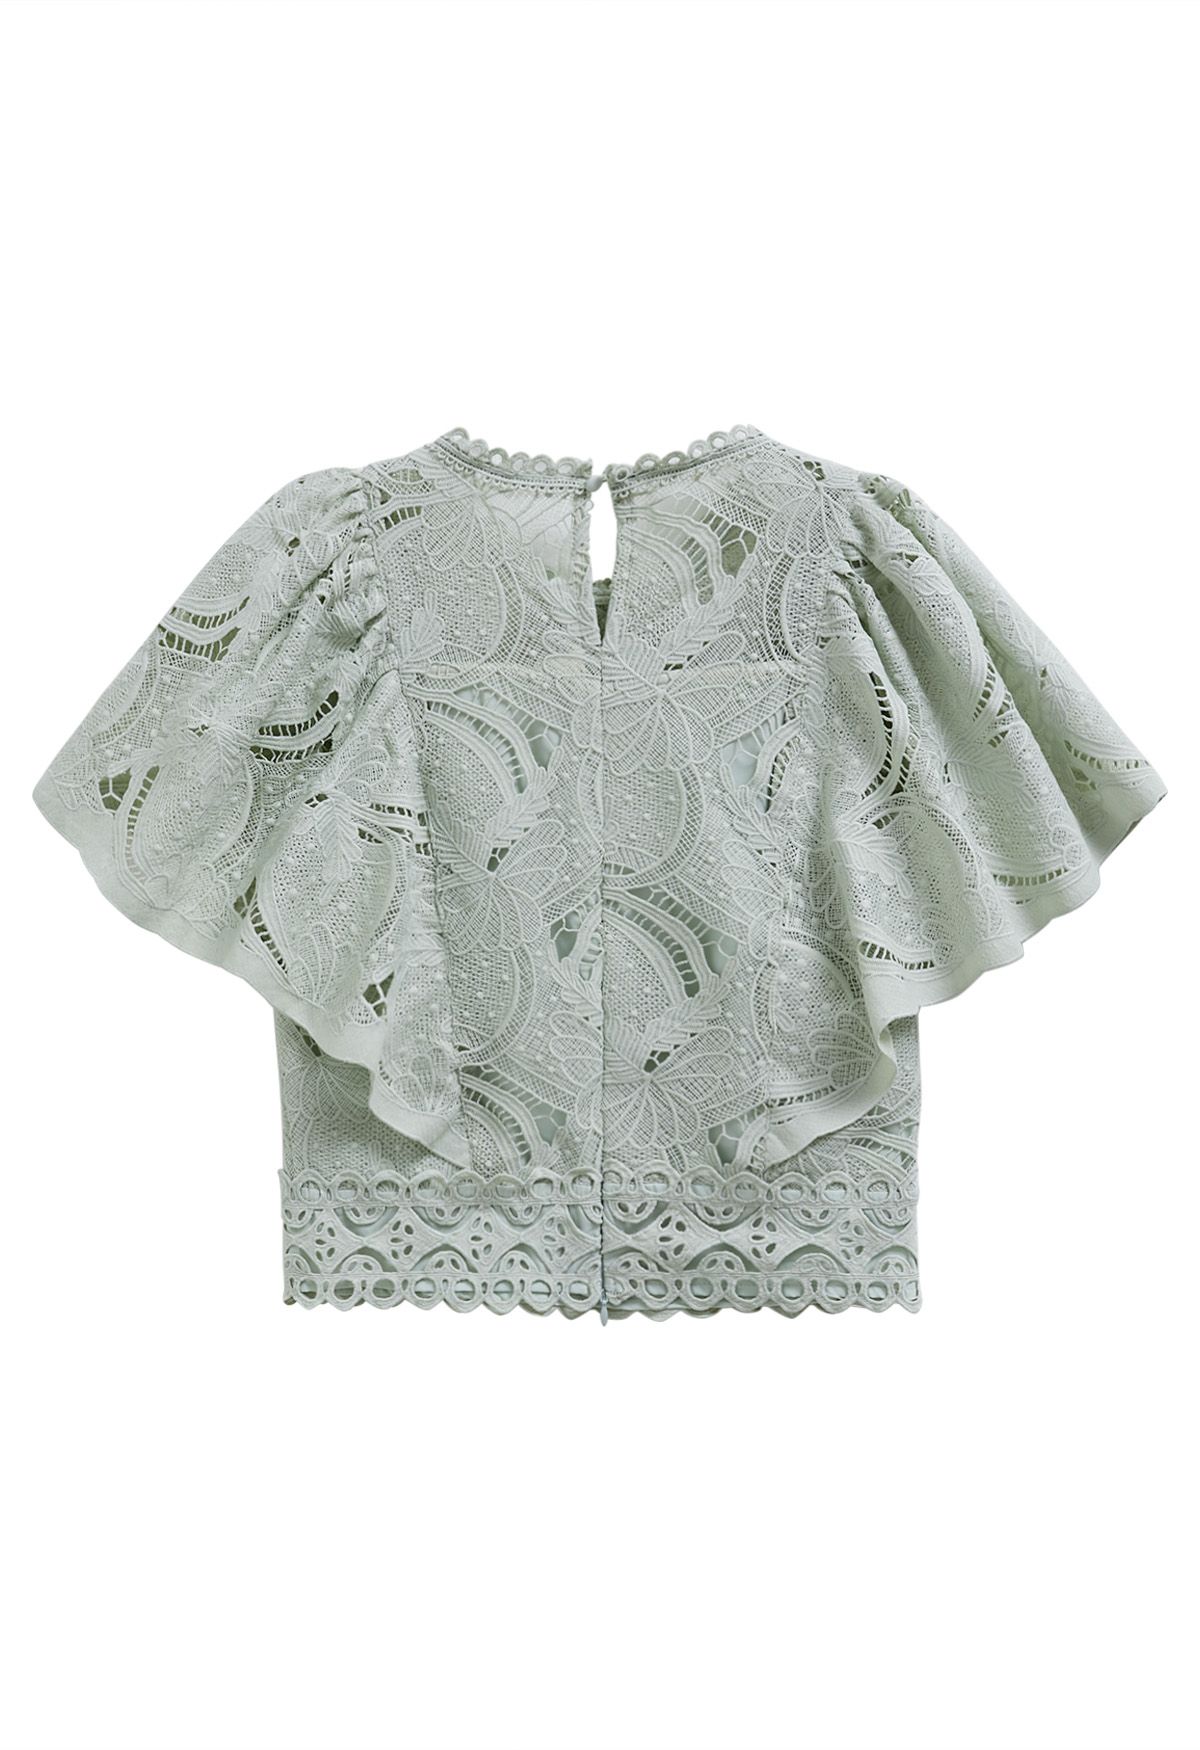 Leaves Cutwork Lace Flutter Sleeve Top in Pea Green